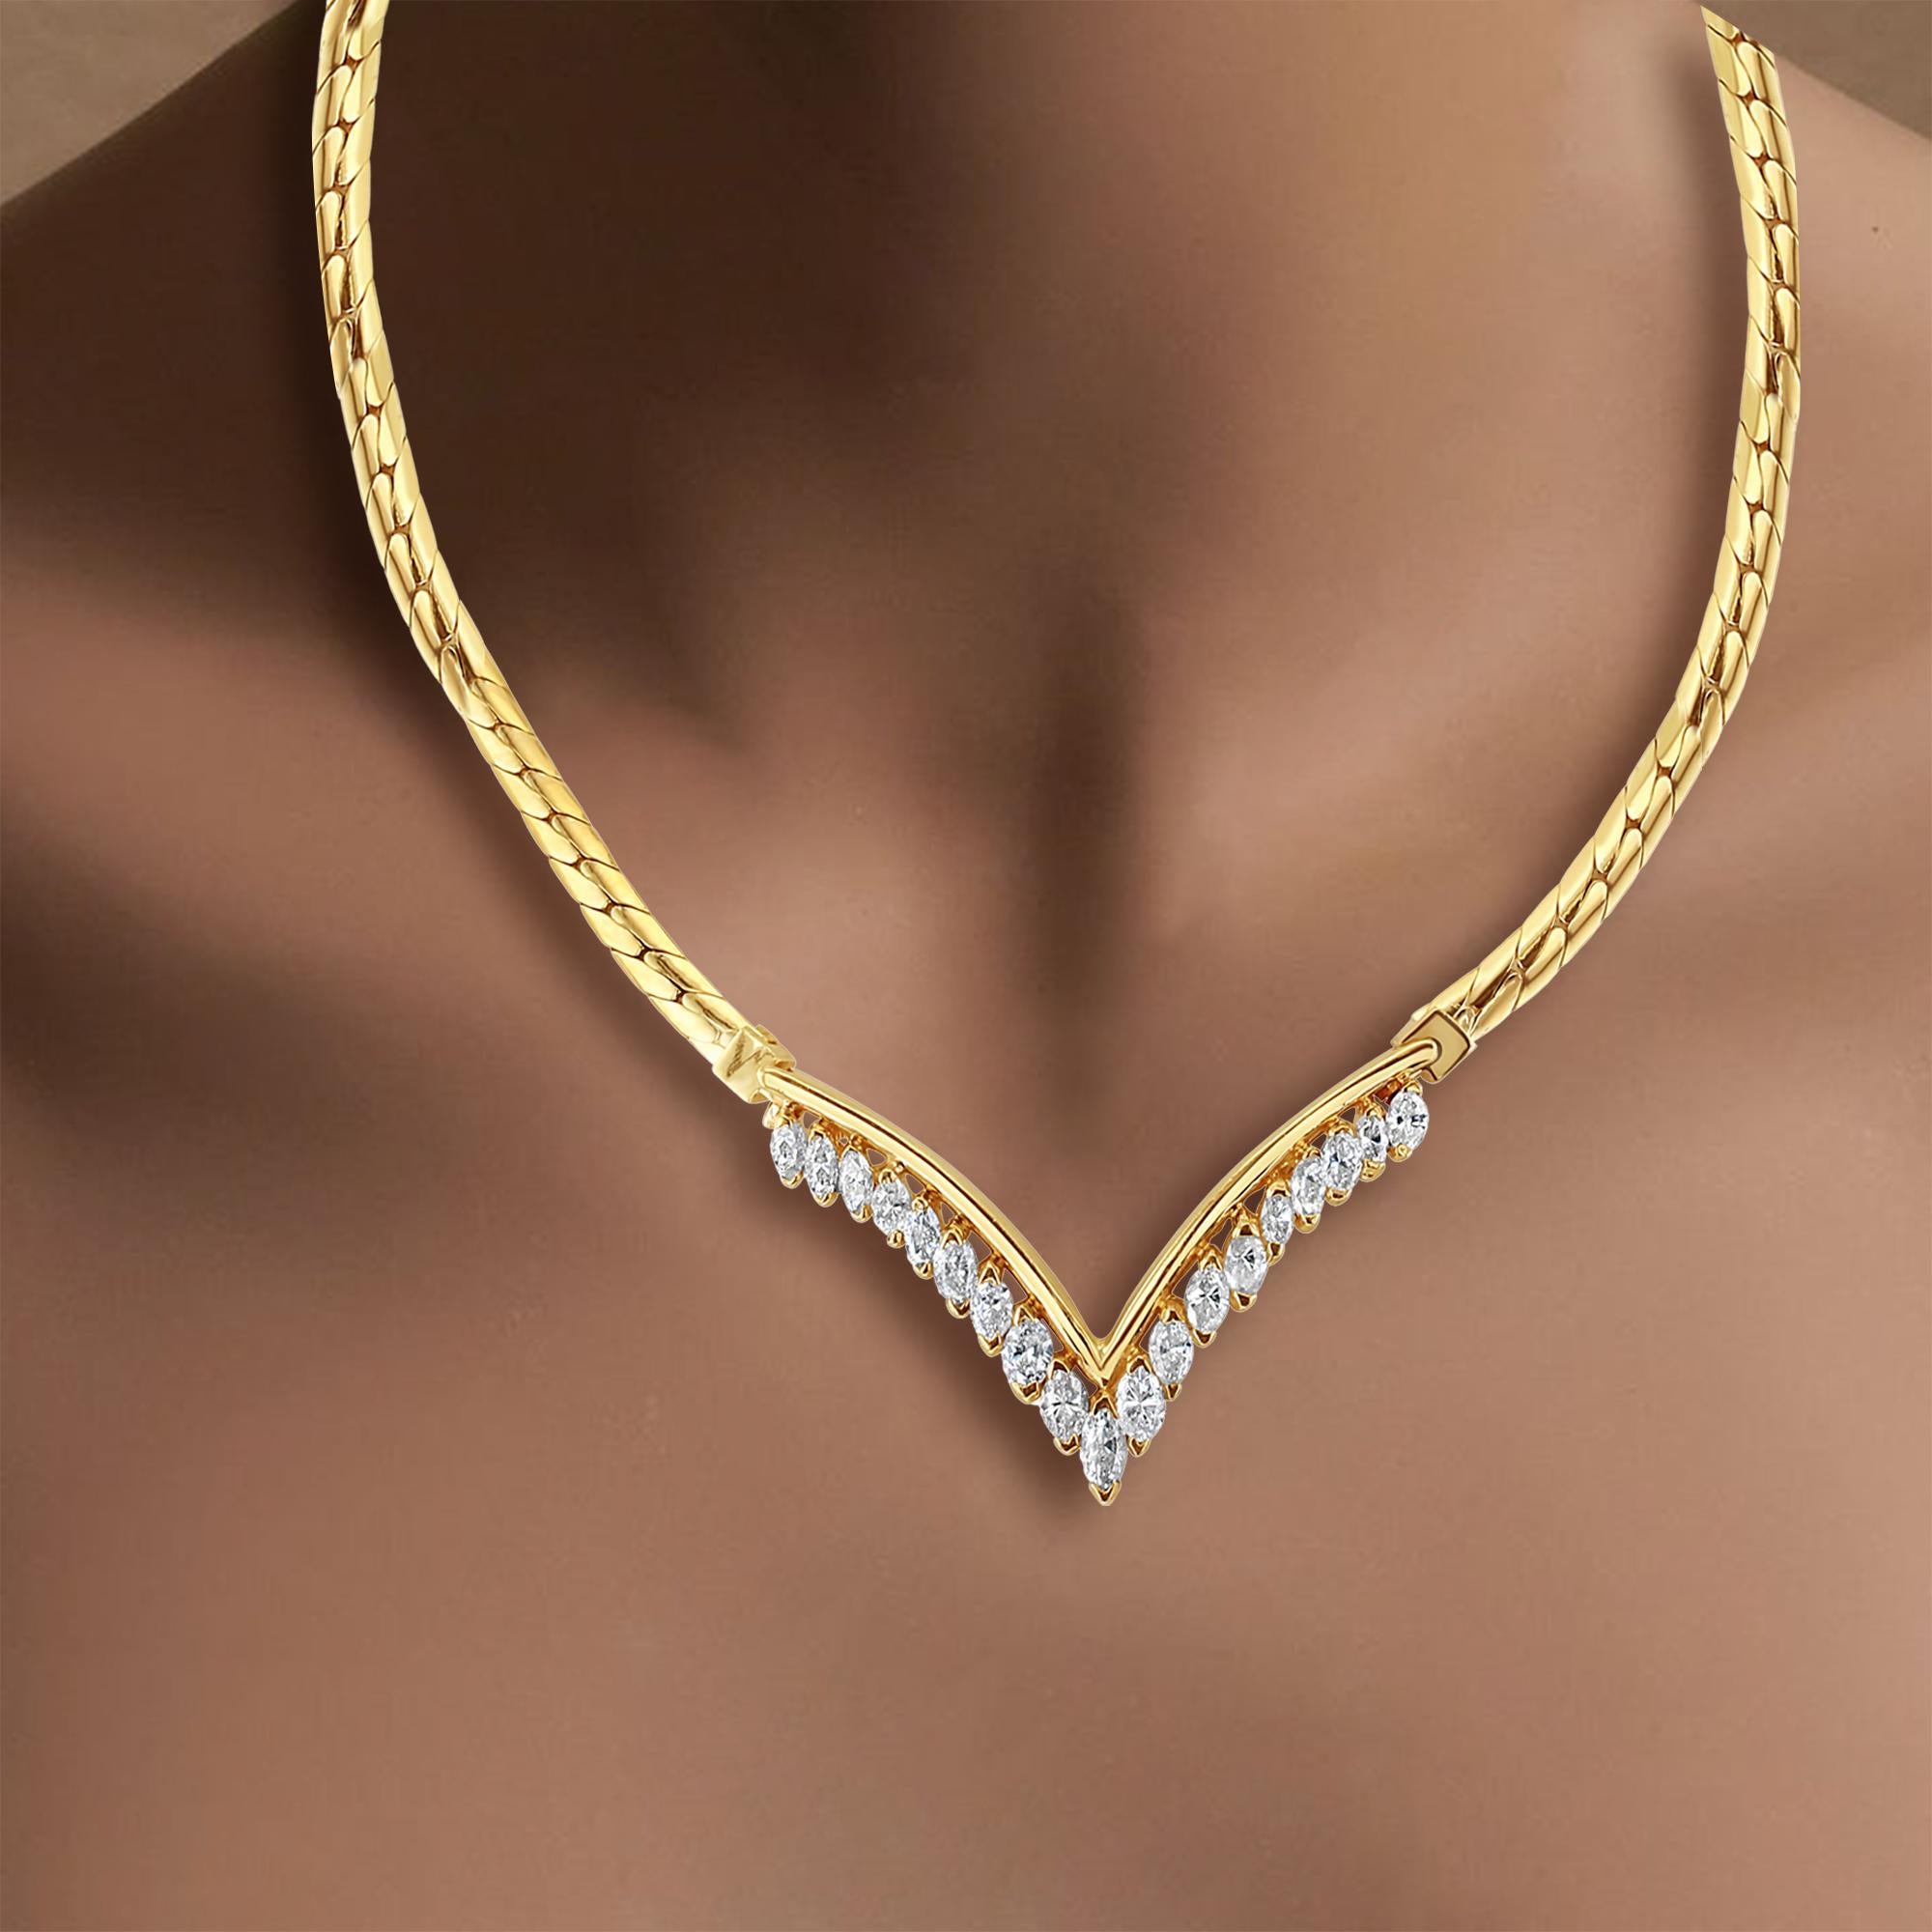 ♥ Product Summary ♥

Main Stone: Diamond
Approx. Carat Weight: 1.75cttw
Diamond Color: G
Diamond Clarity: SI2
Stone Cut: Marquise  
Material: 14k Yellow Gold
Dimensions: 35mm x 27mm
Chain: Beveled Snake
Width of Chain: 3mm
Weight: 15 grams
Length: